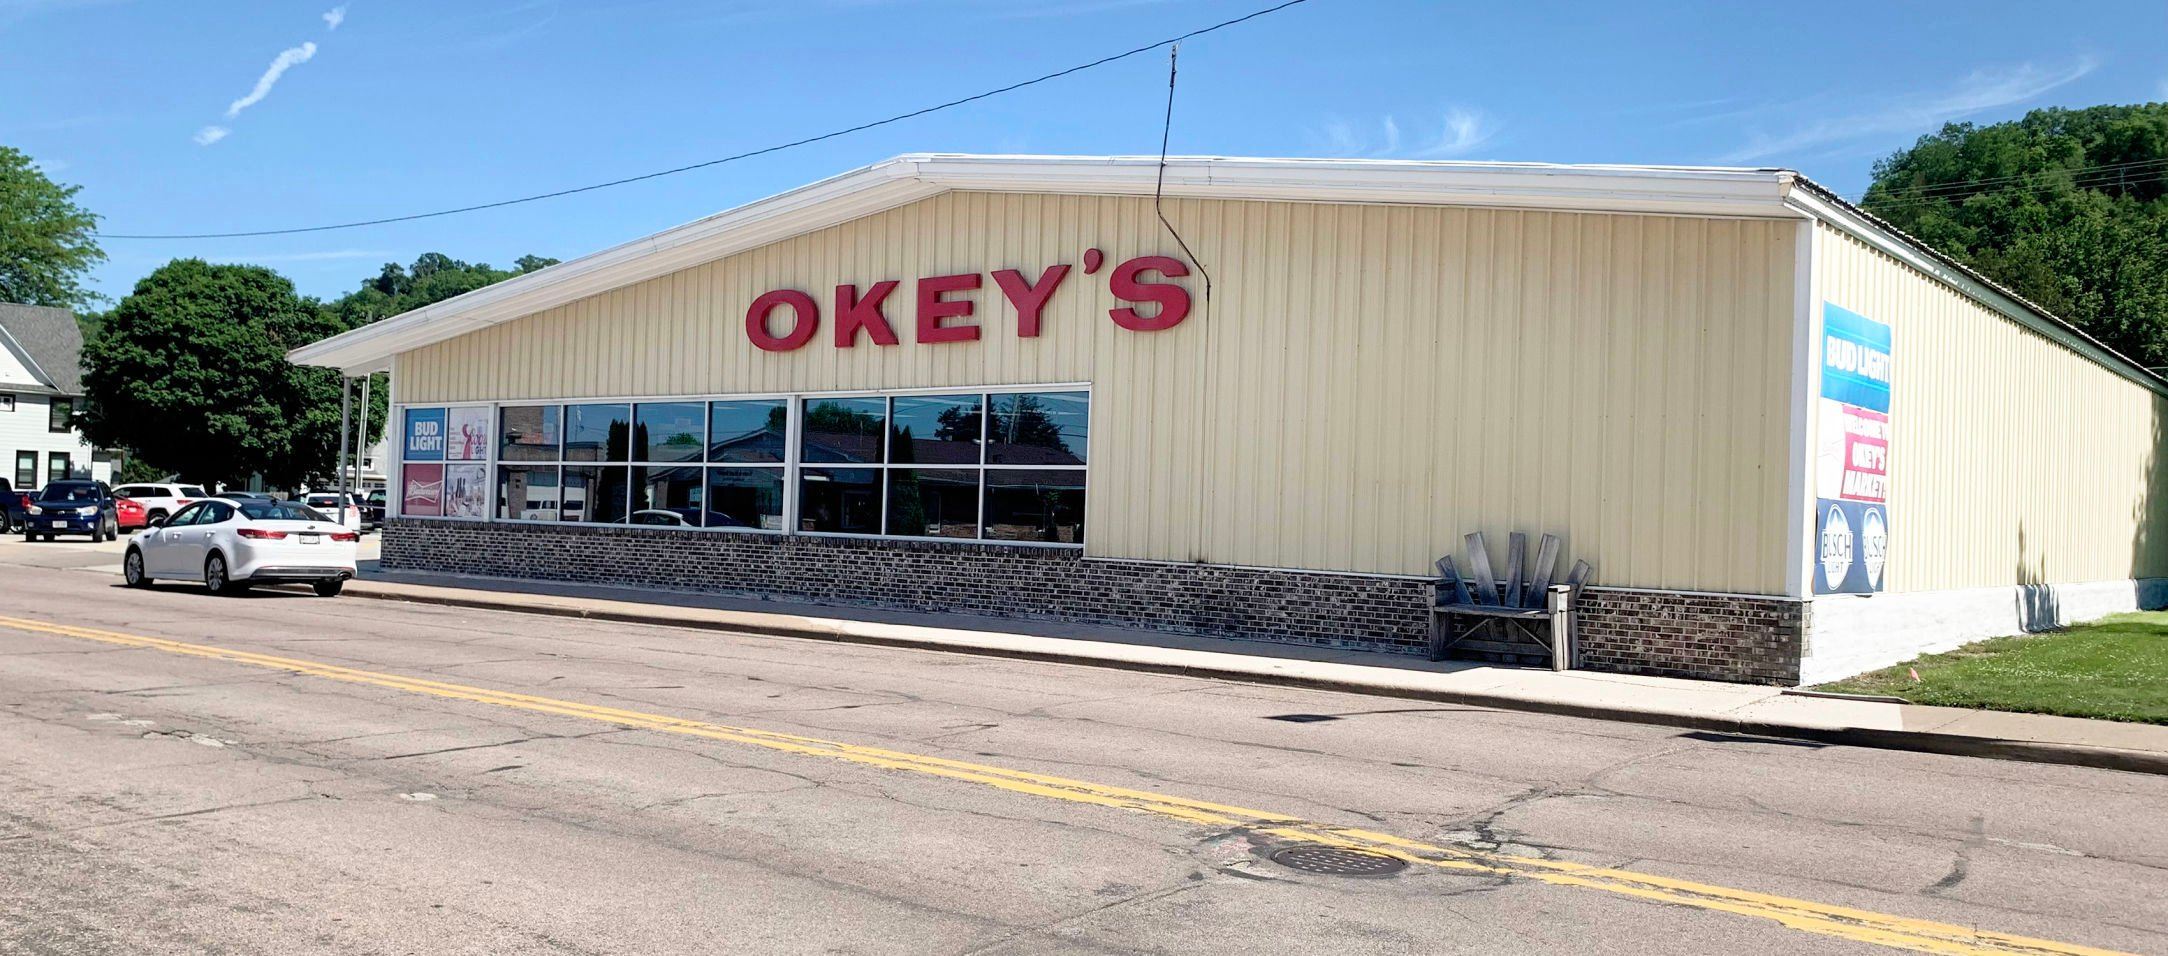 Okey’s Market is located at 213 W. Amelia St., Cassville, Wis. The 12,000-square-foot store was established in 1933 and has been in its current location since 1970.    PHOTO CREDIT: Erik Hogstrom